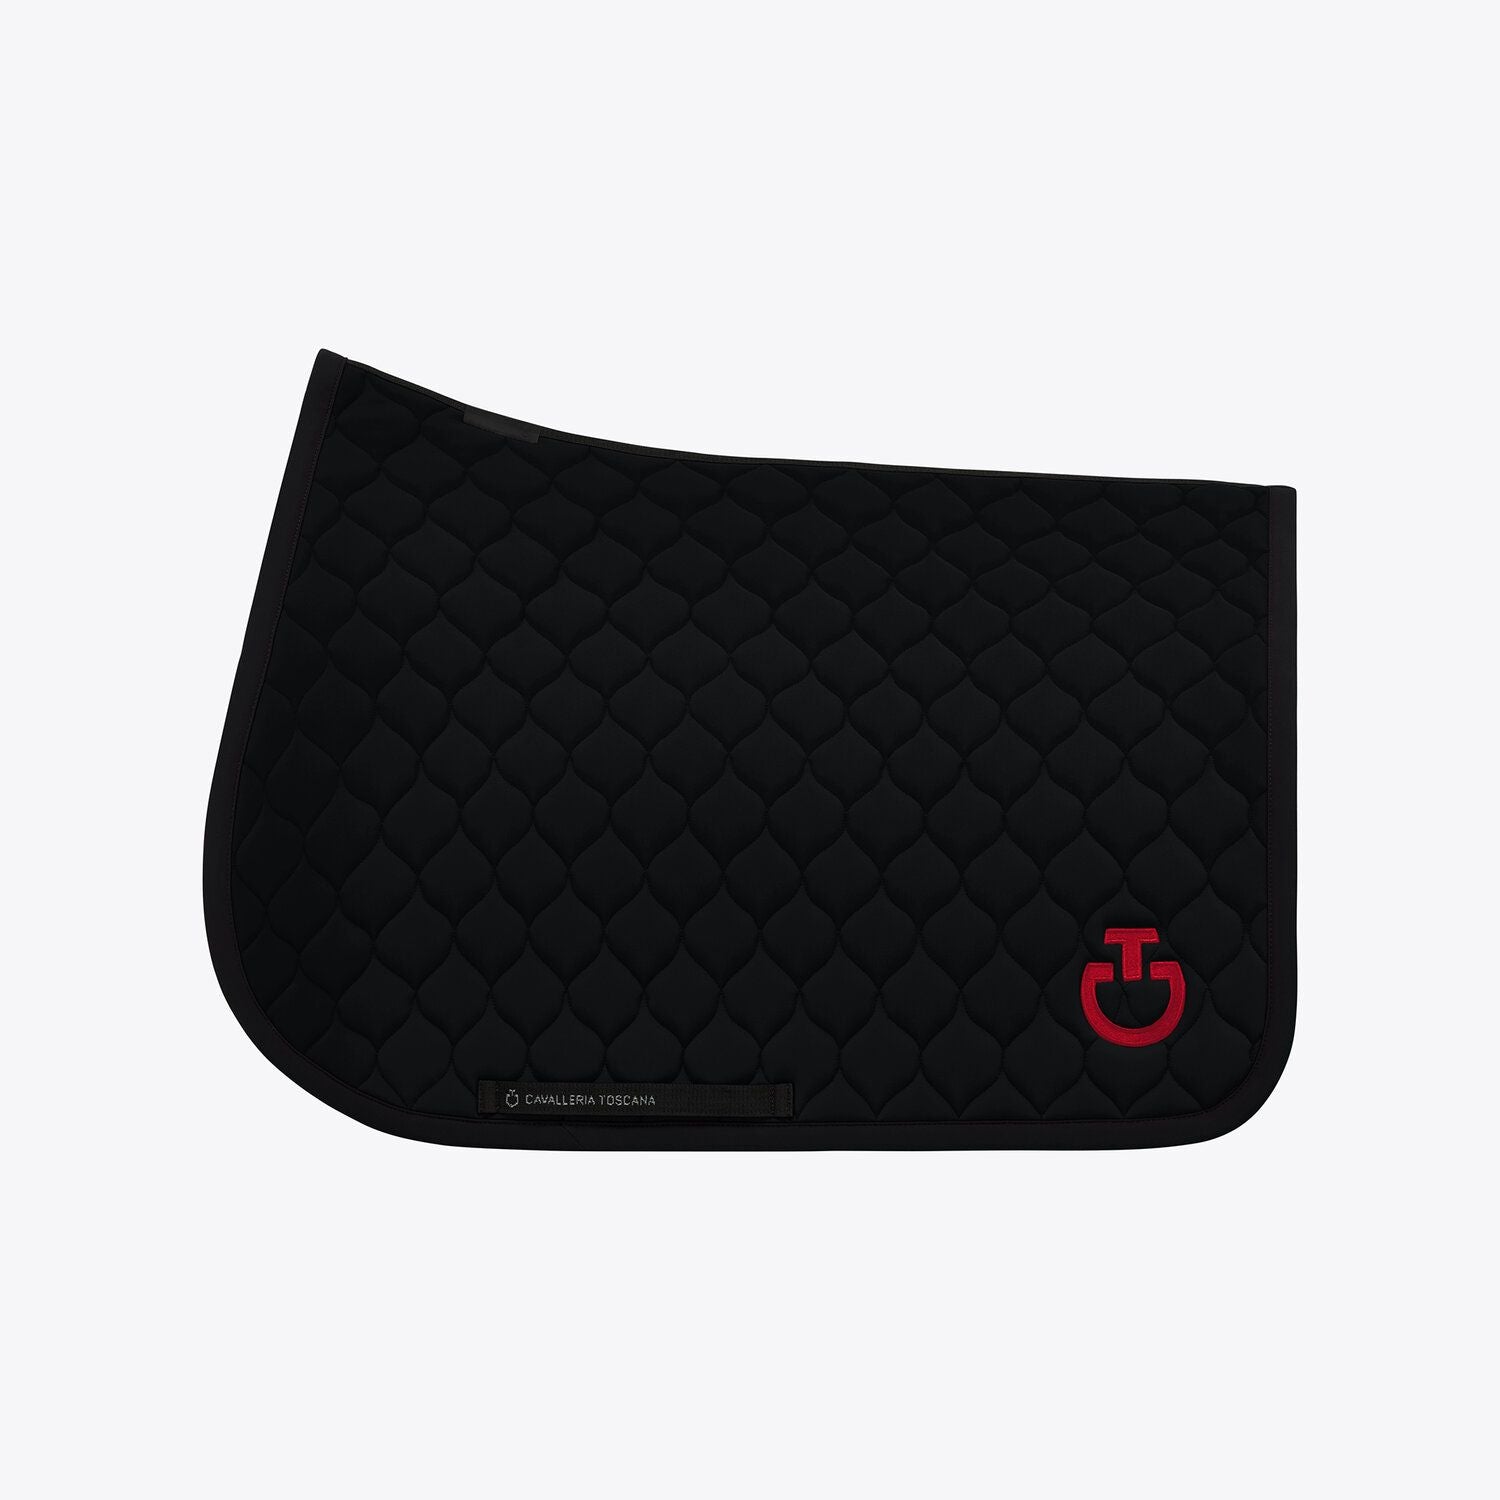 CIRCULAR QUILTED JERSEY JUMPING SADDLE PAD BLACK/RED